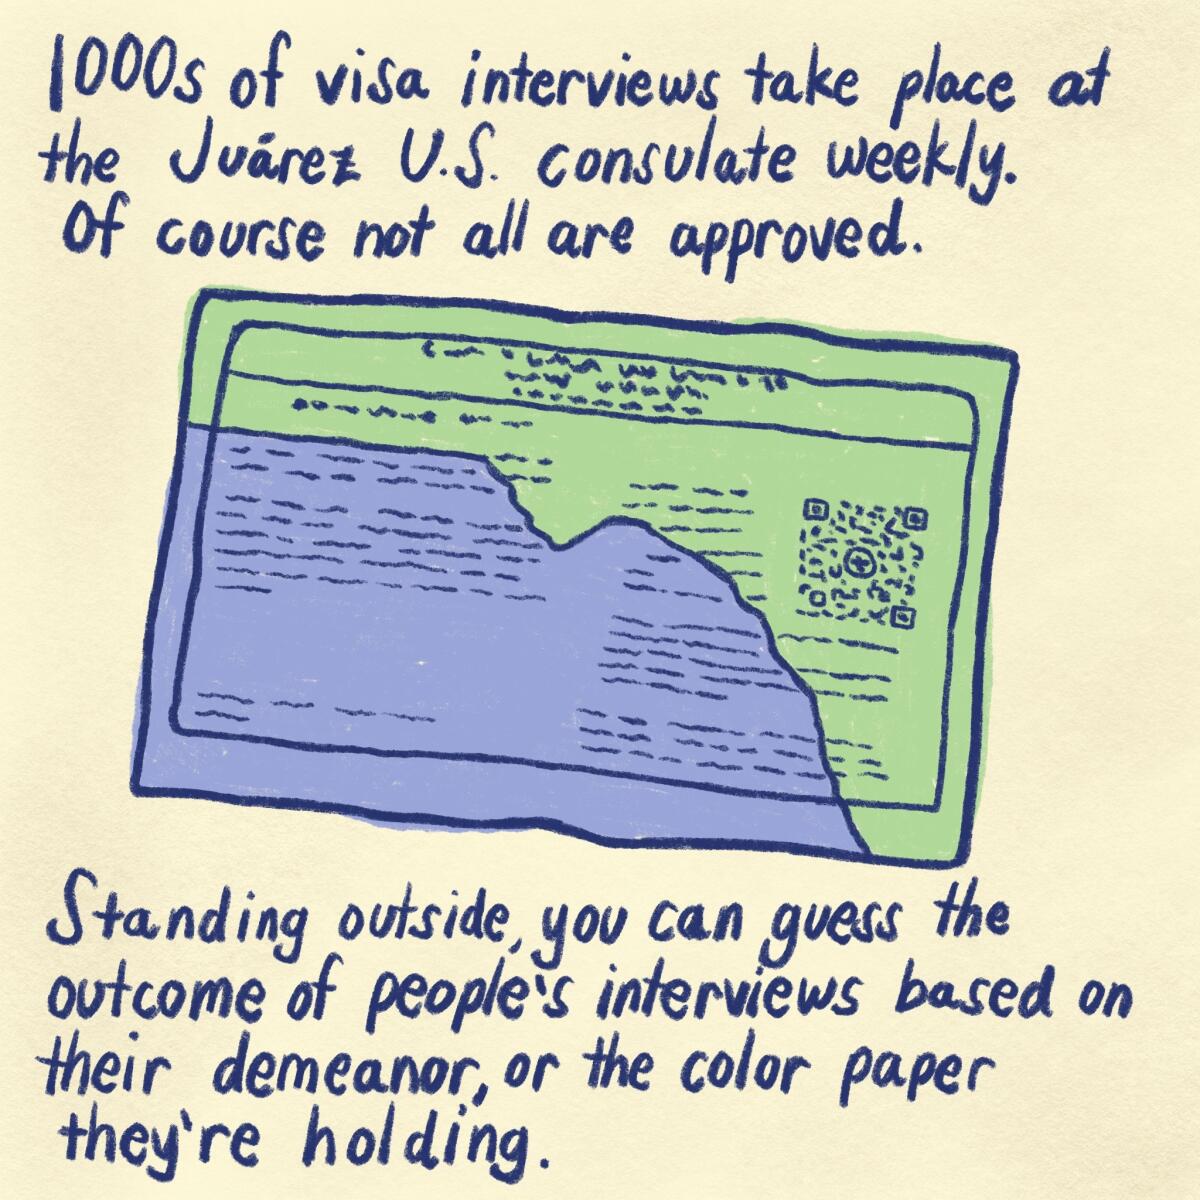 1000s of visa interviews take place at the Juarez U.S. consulate weekly. of course not all are approved. 